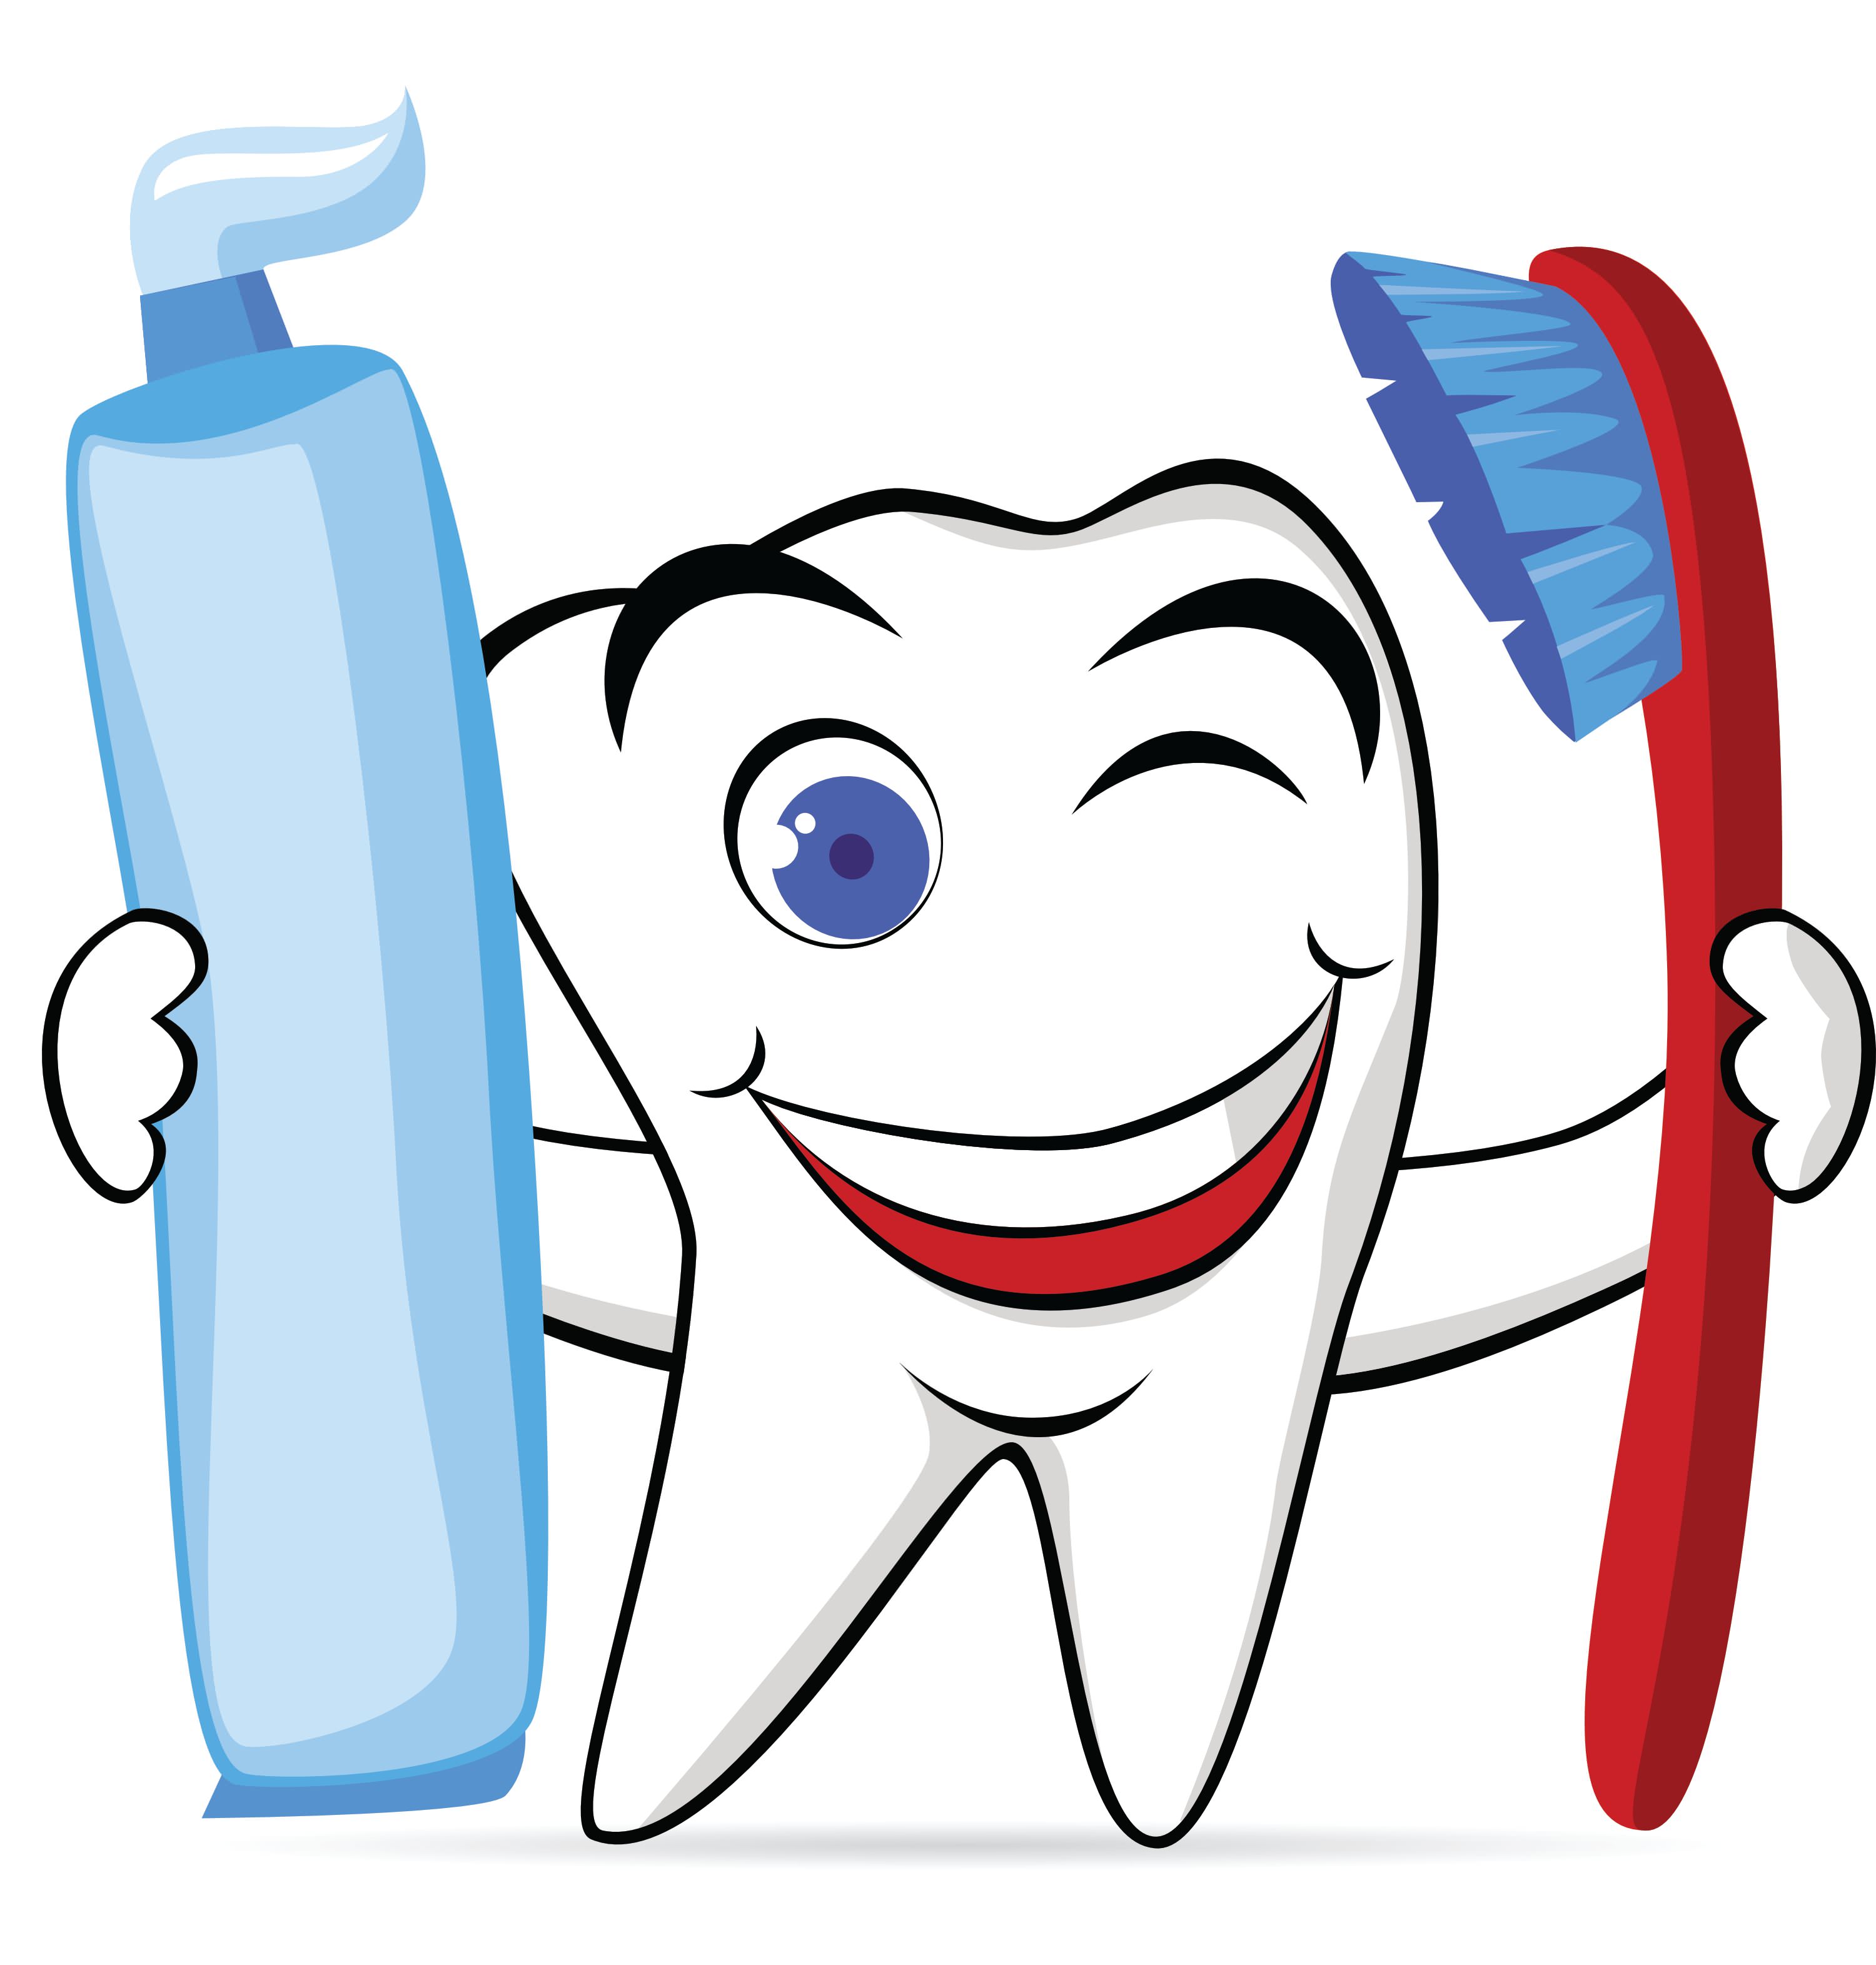 Tooth Cartoon Images - ClipArt Best